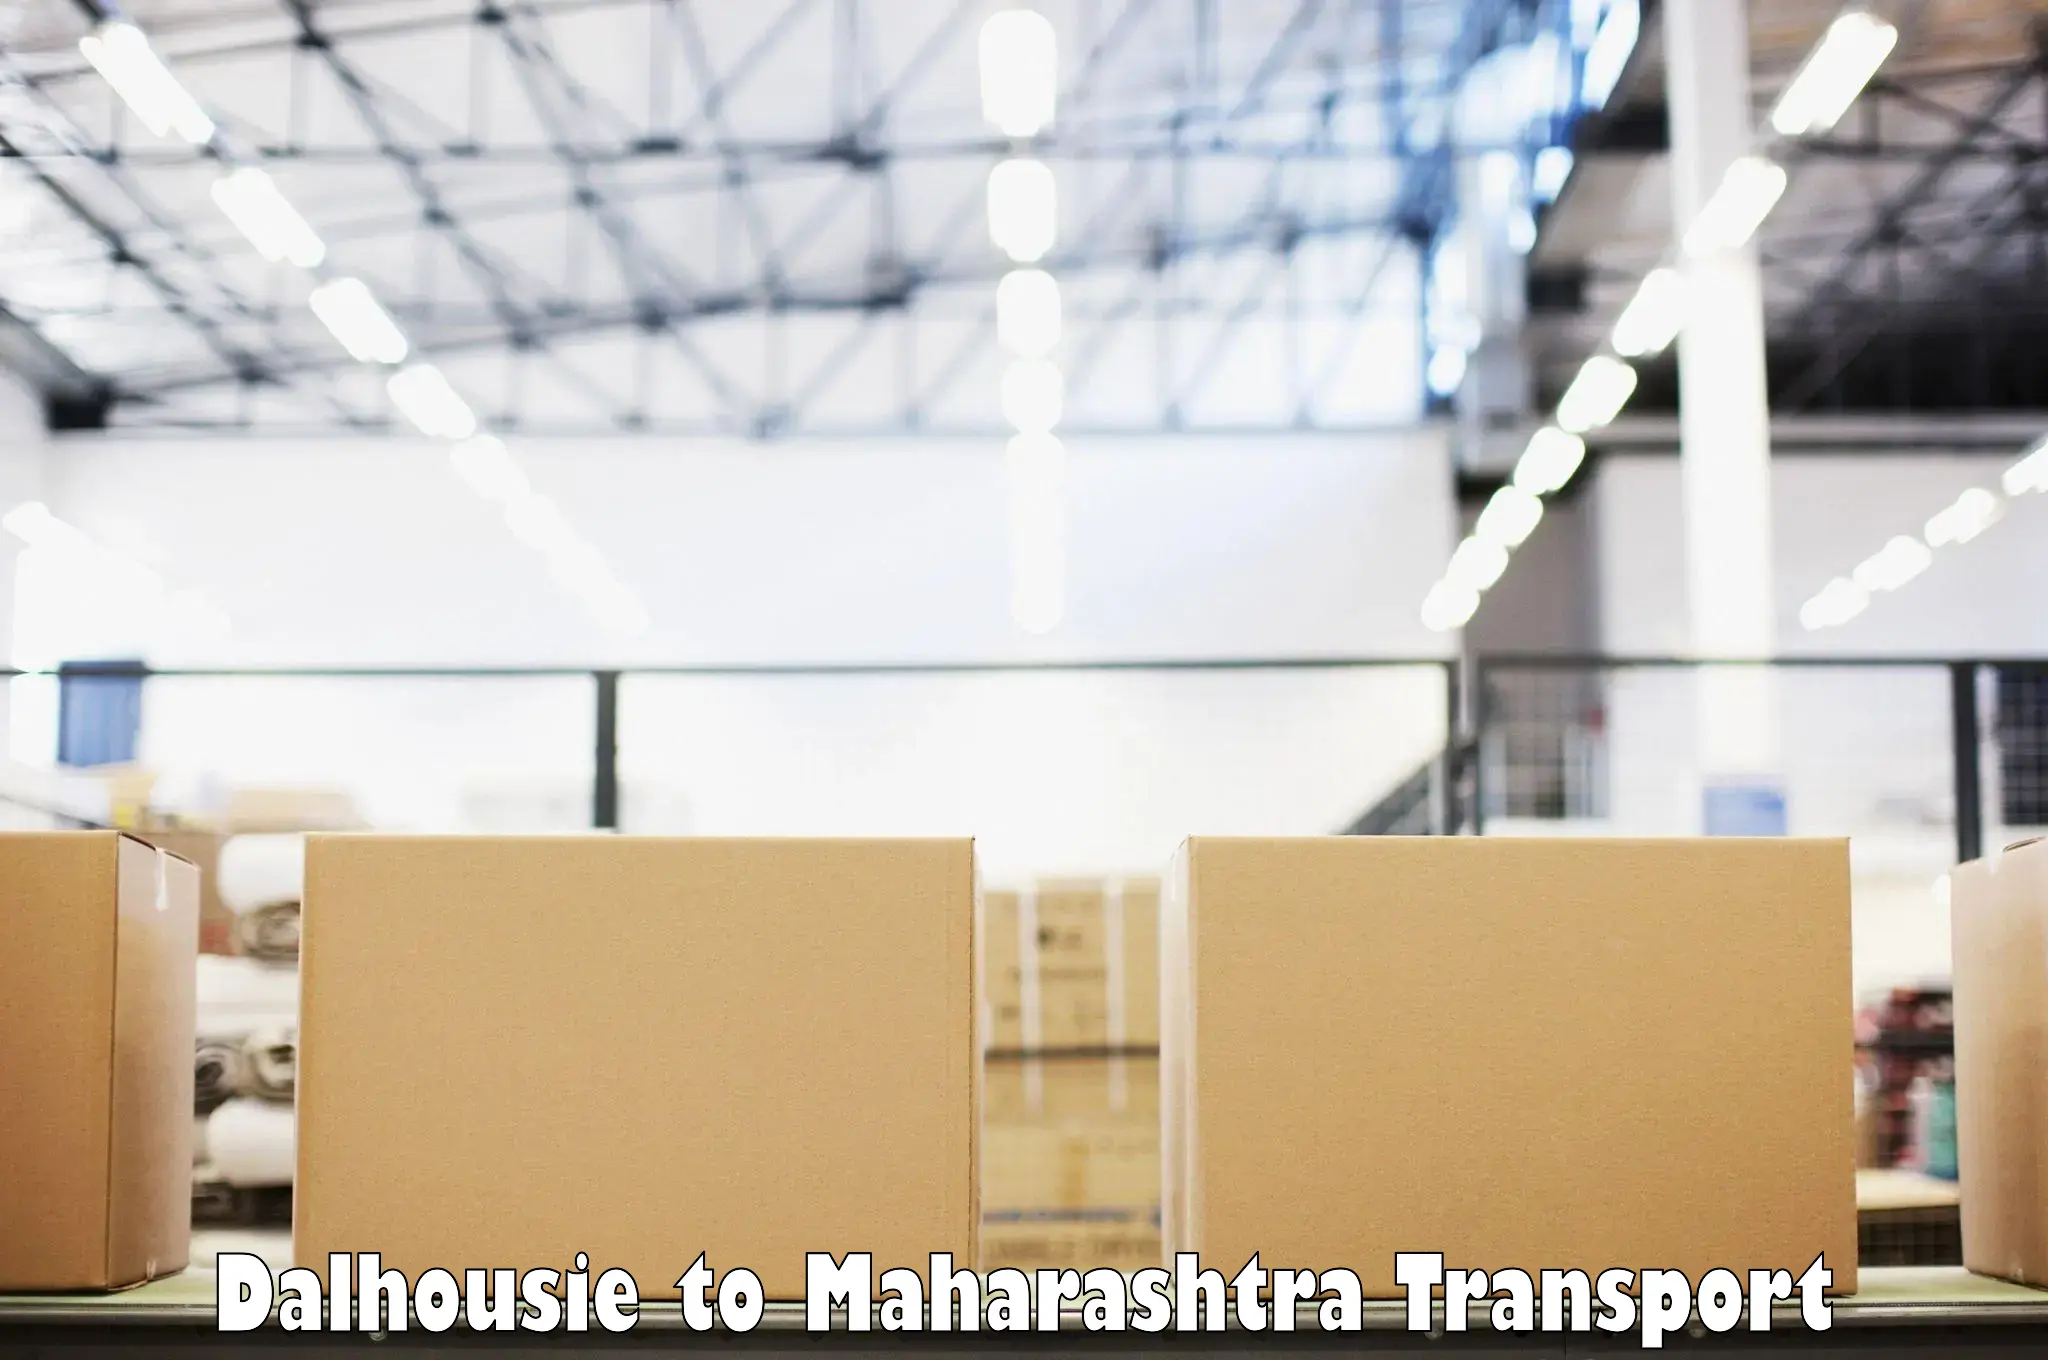 Truck transport companies in India Dalhousie to Loha Nanded